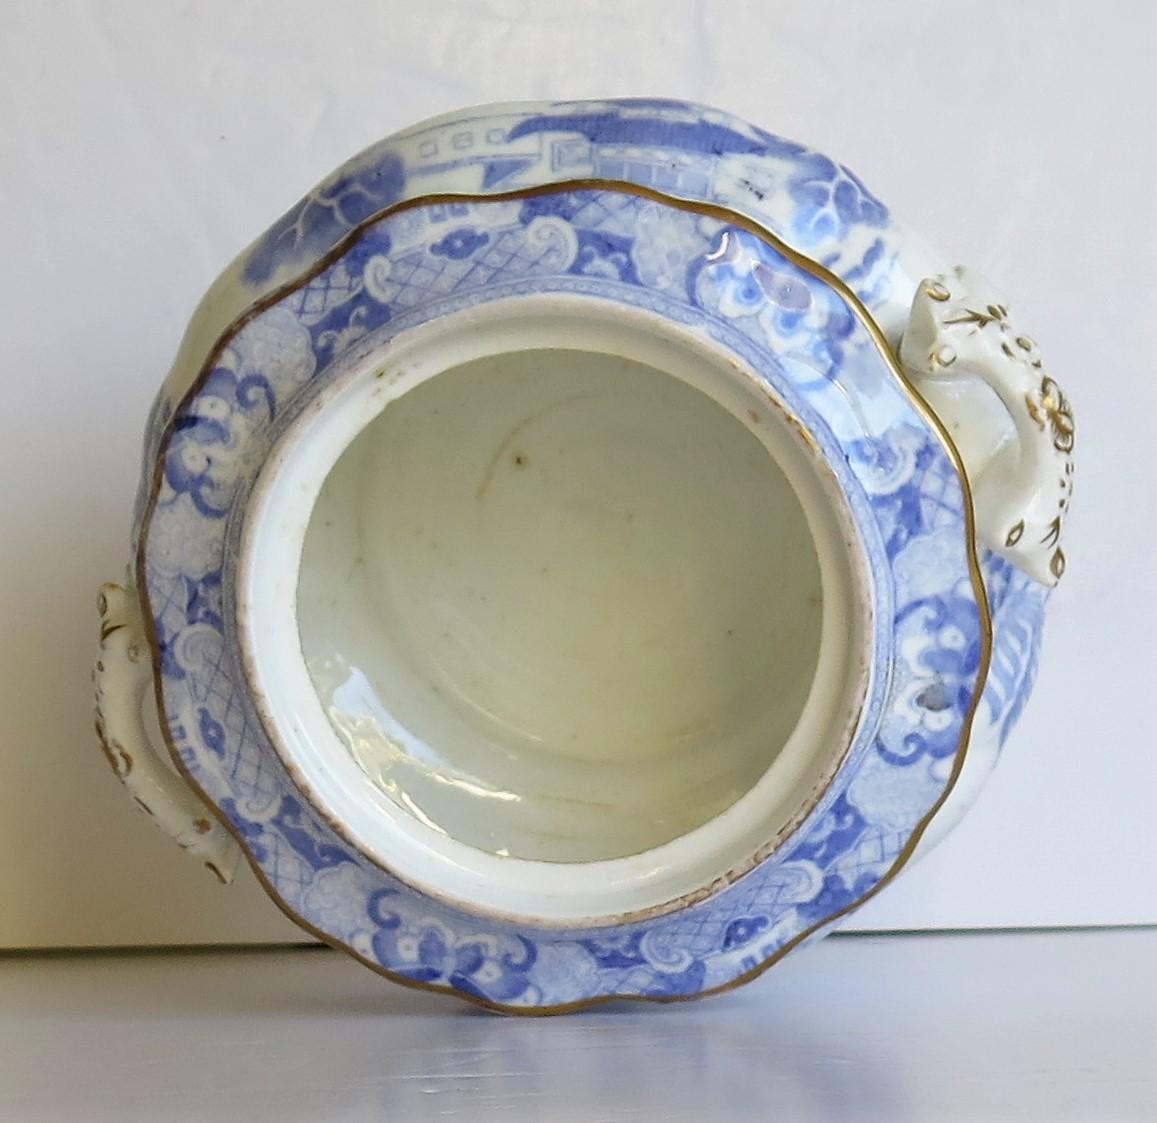 Miles Mason Porcelain Sucrier Blue and White Broseley Willow Pattern, circa 1810 For Sale 6